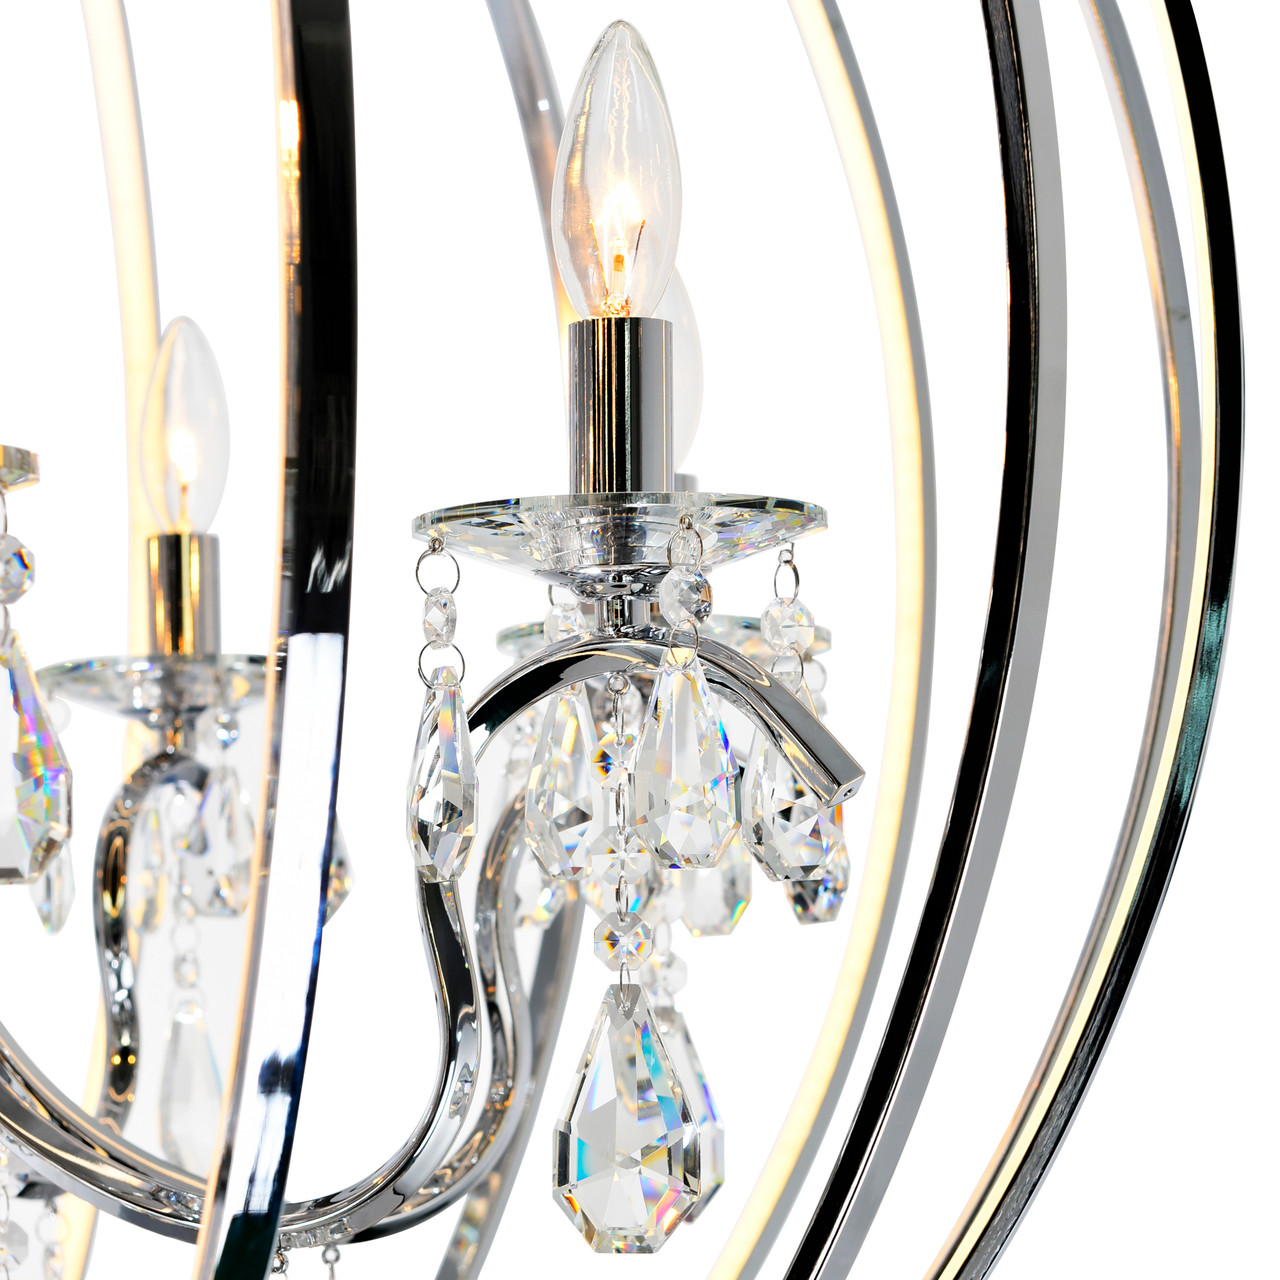 CWI LIGHTING 5025P34C-8 8 Light Up Chandelier with Chrome finish